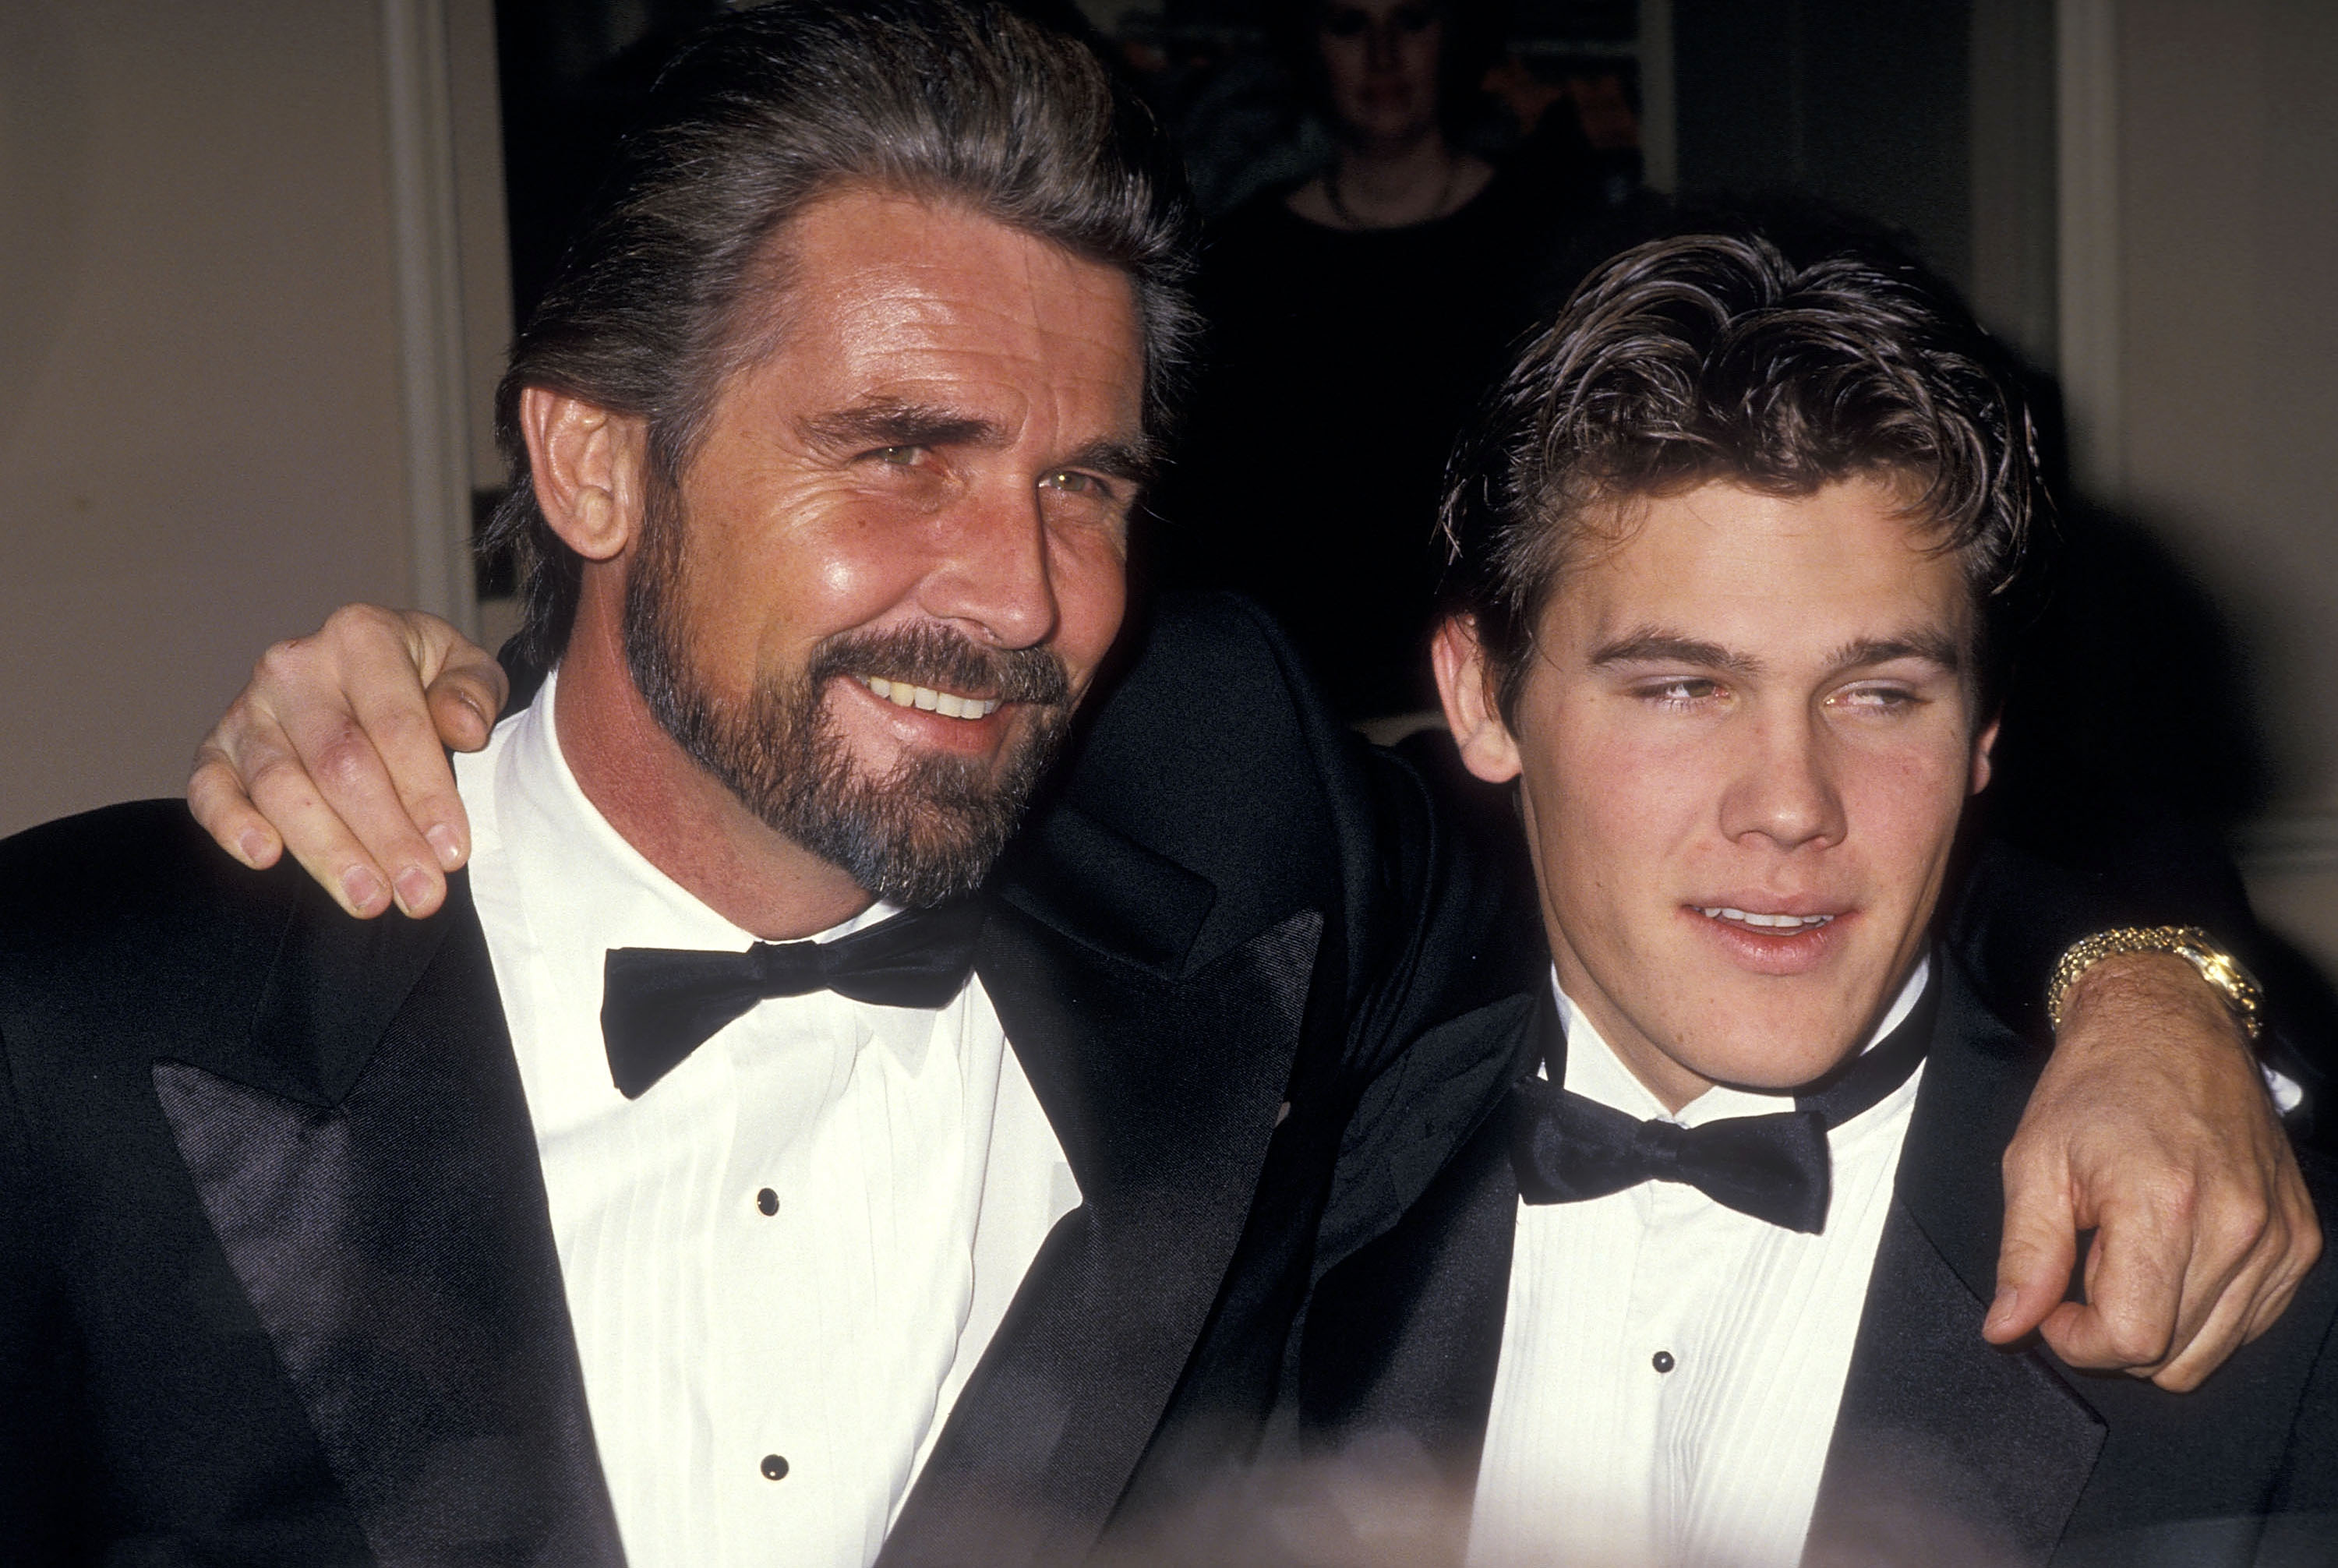 James Brolin and actor Josh Brolin on January 31, 1987 in Beverly Hills, California | Source: Getty Images